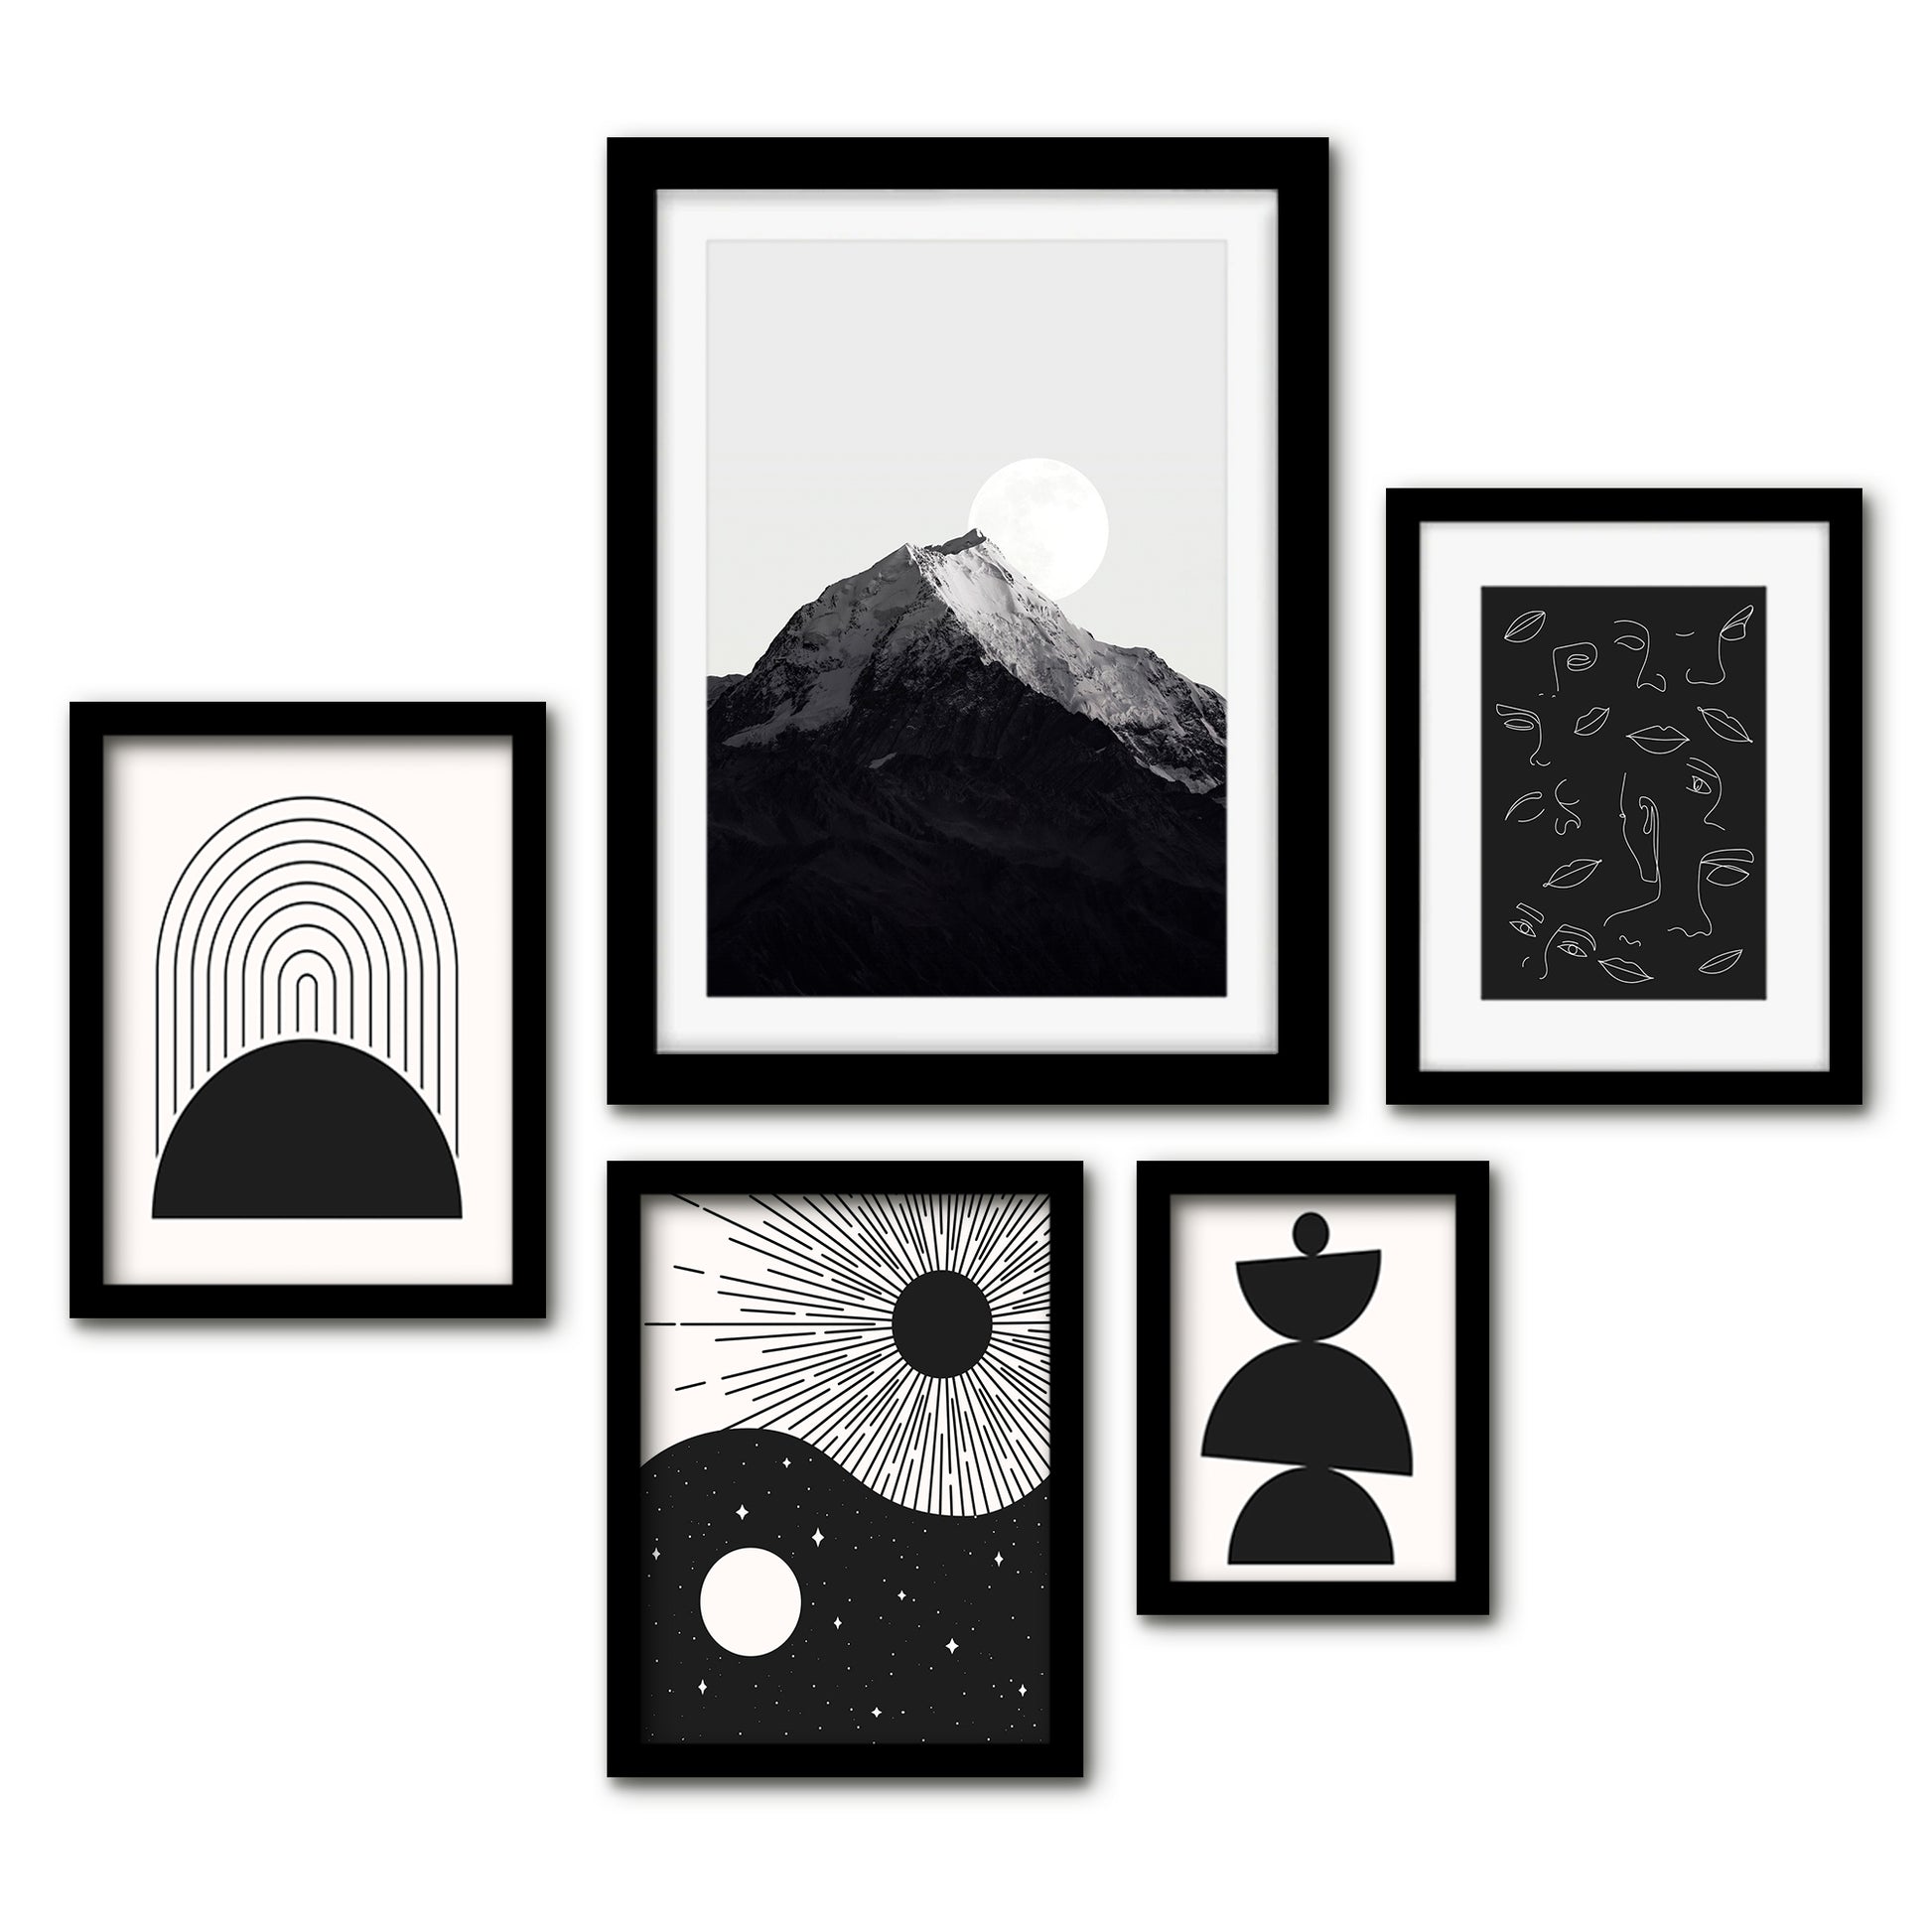 Americanflat 5 Piece Black Framed Gallery Wall Art Set - Black Abstract Balance L&scape